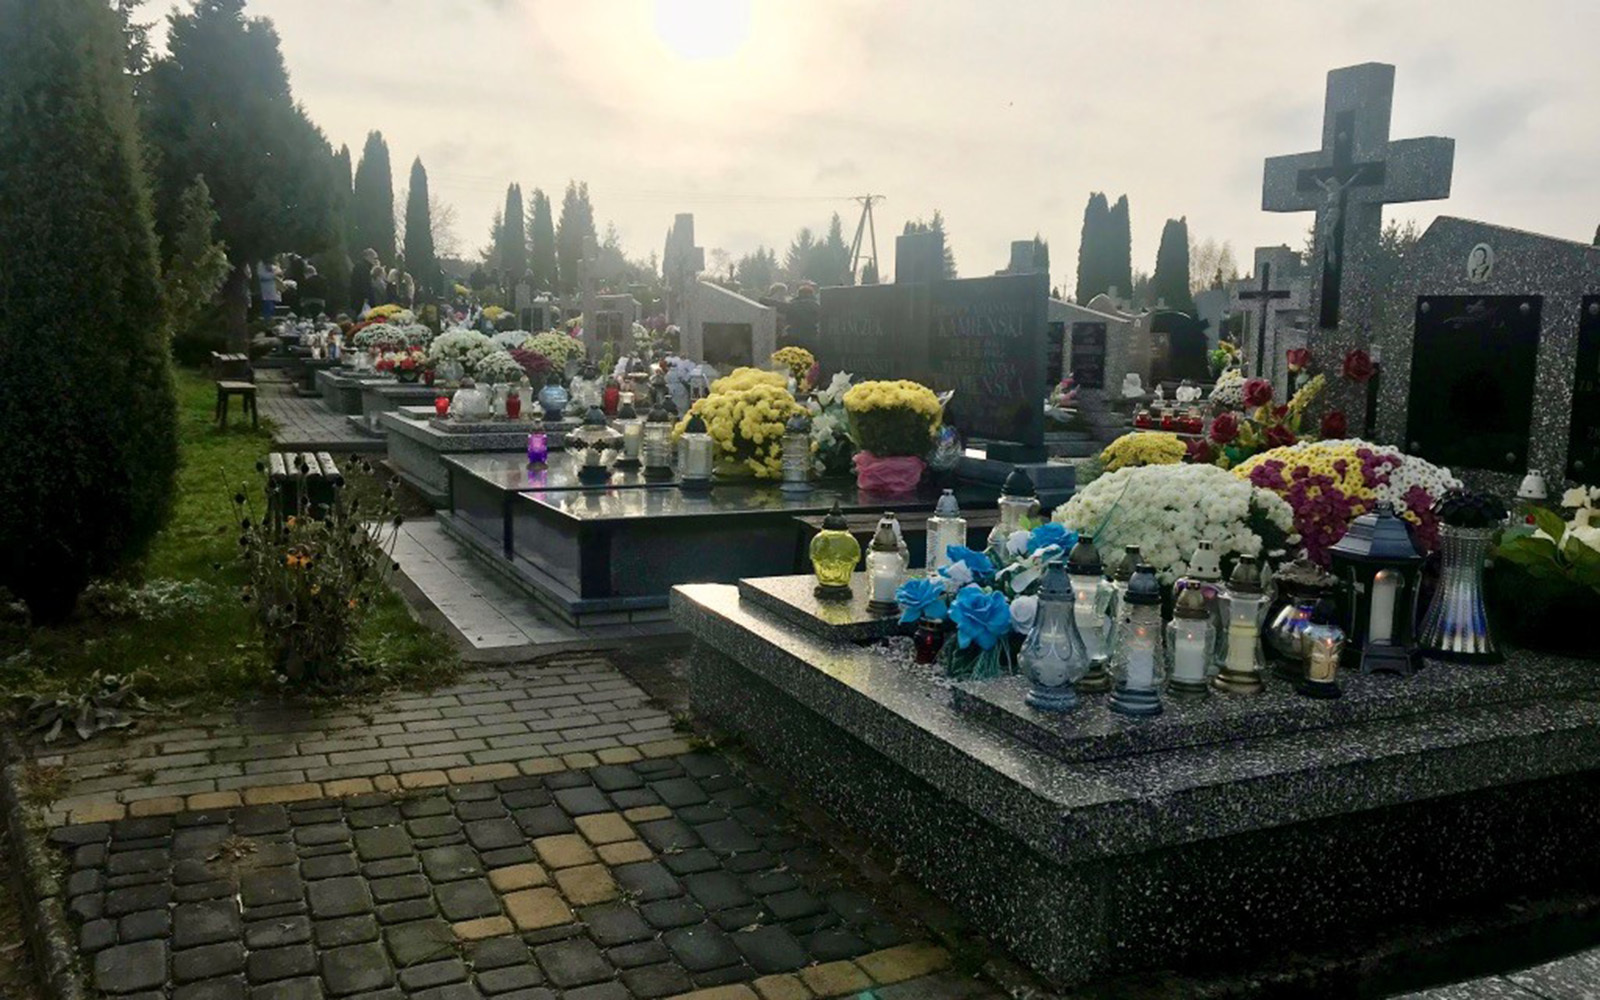 Candles and bouquets at a Cemetery on All Saints Day in Lomza, Poland (Kasia Kolc / UConn School of Business)